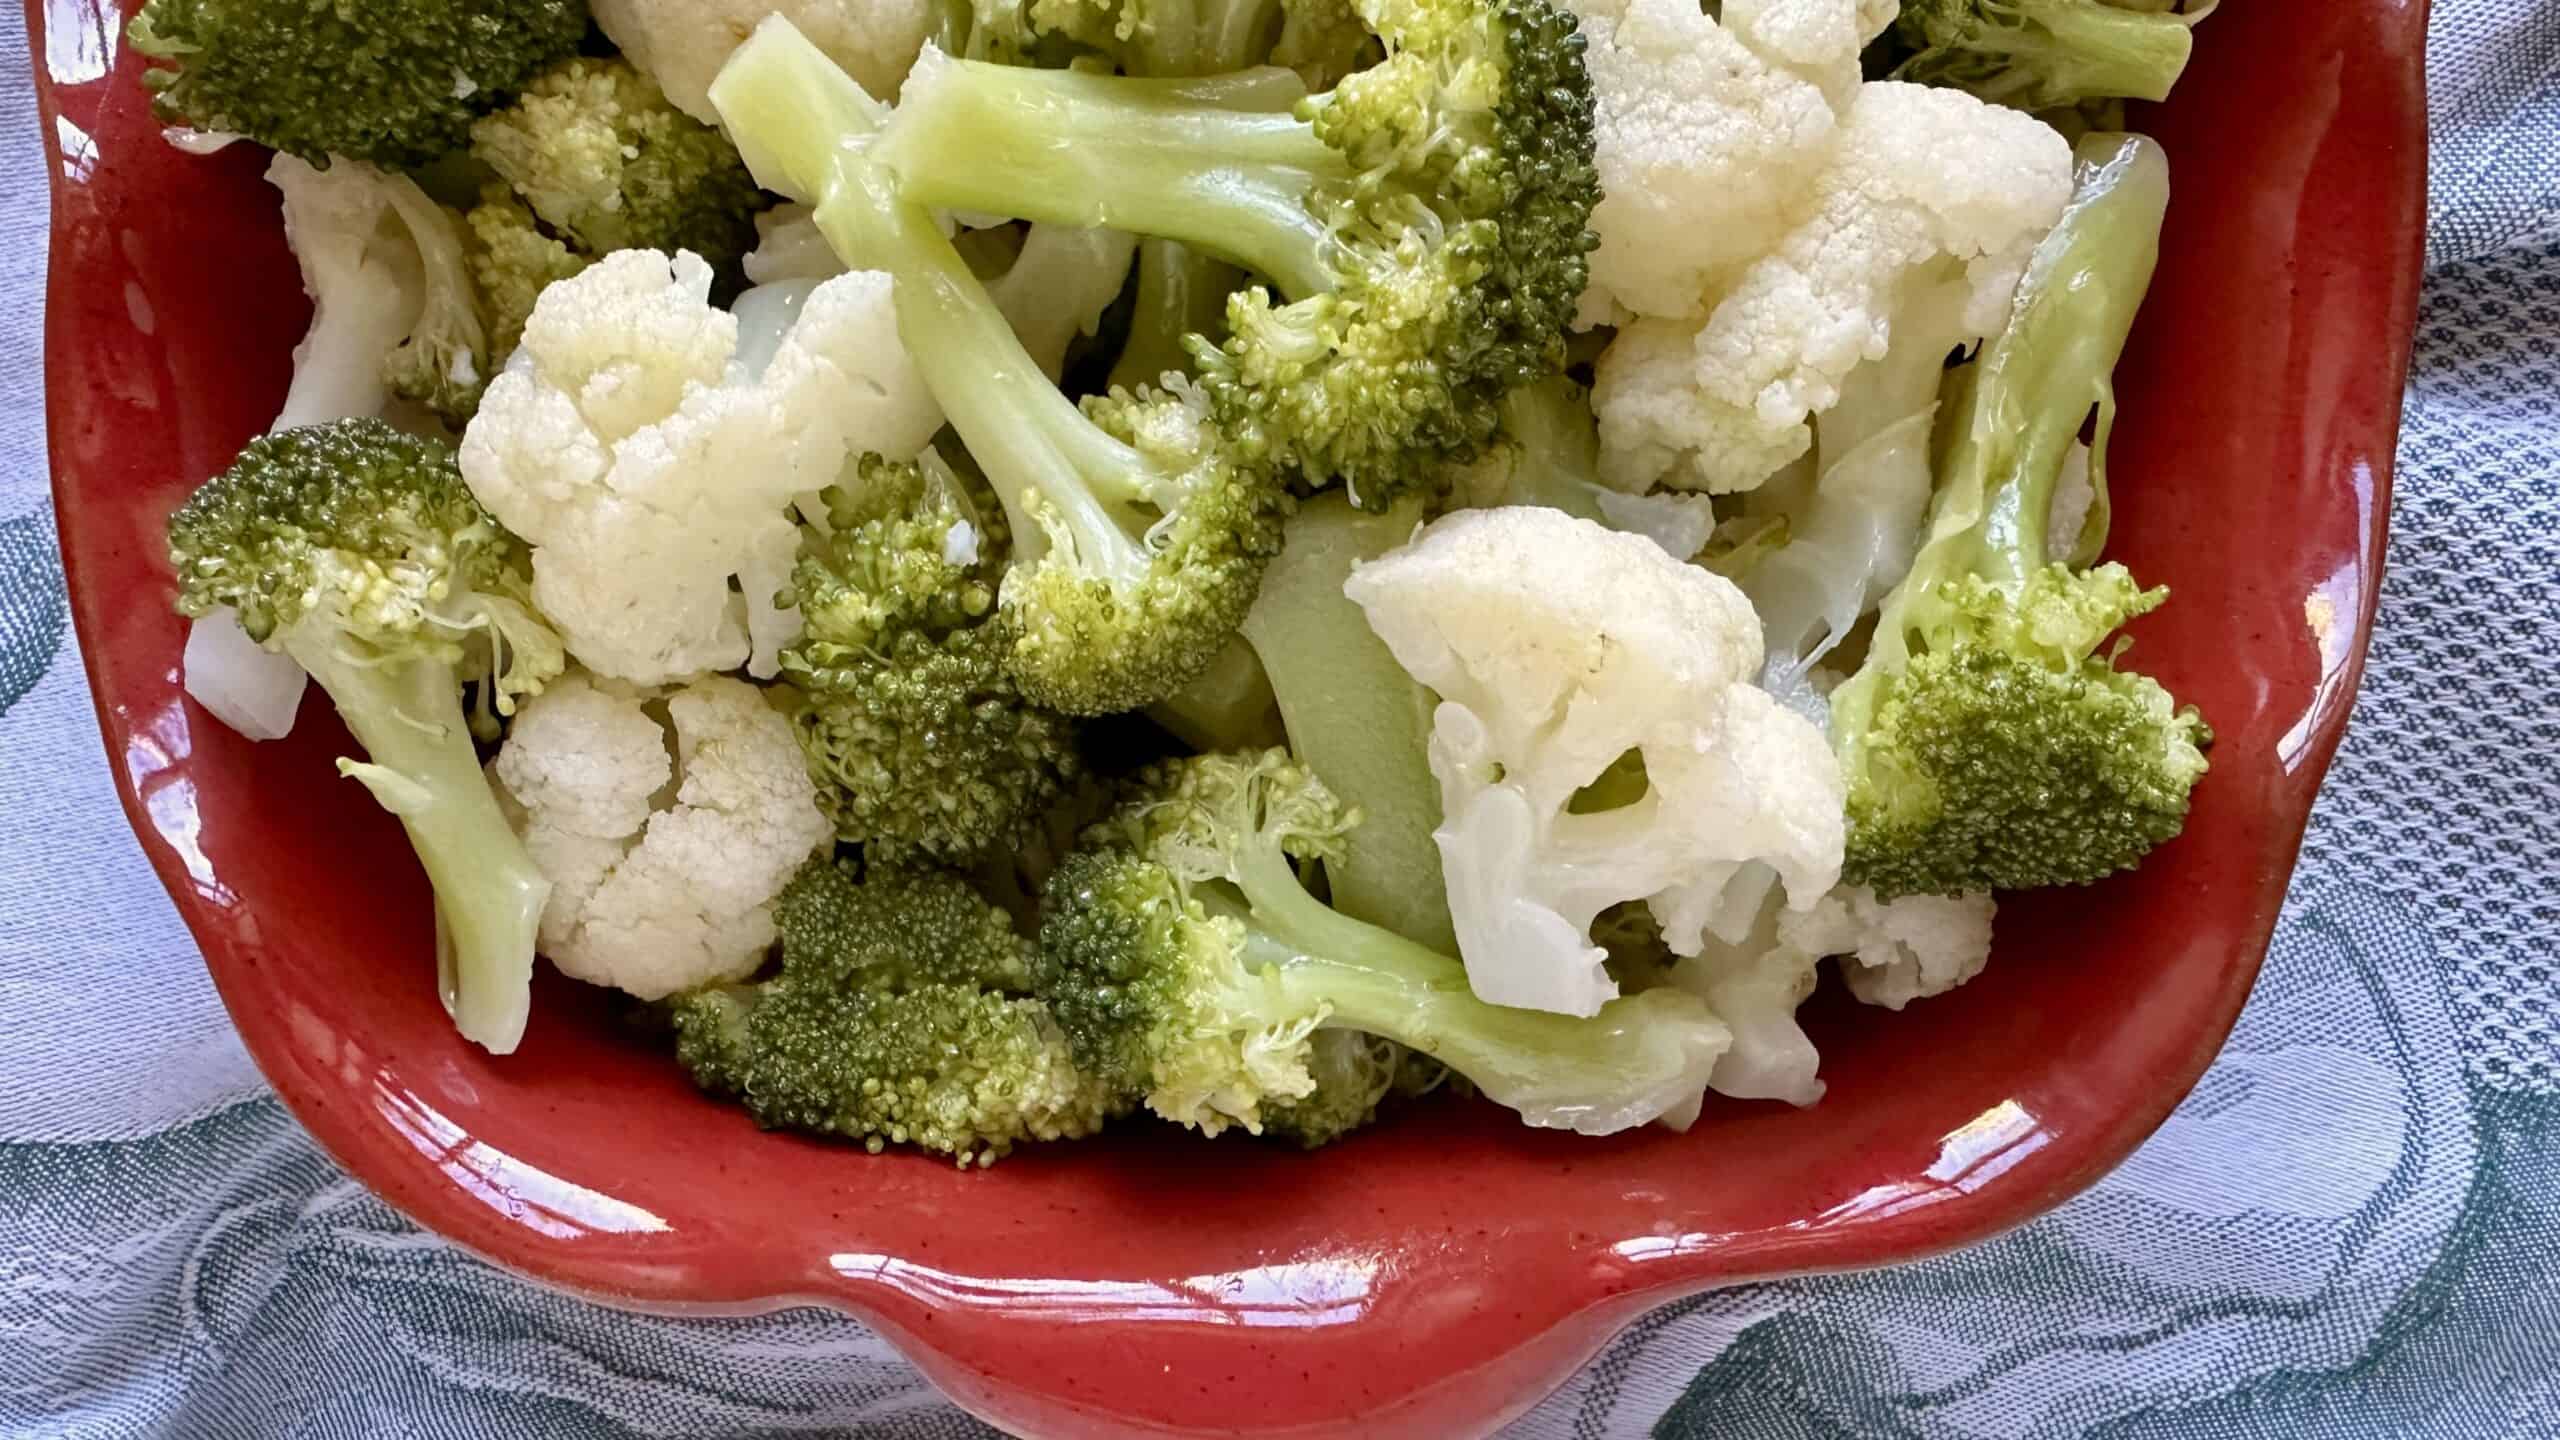 broccoli and cauliflower salad in a red dish